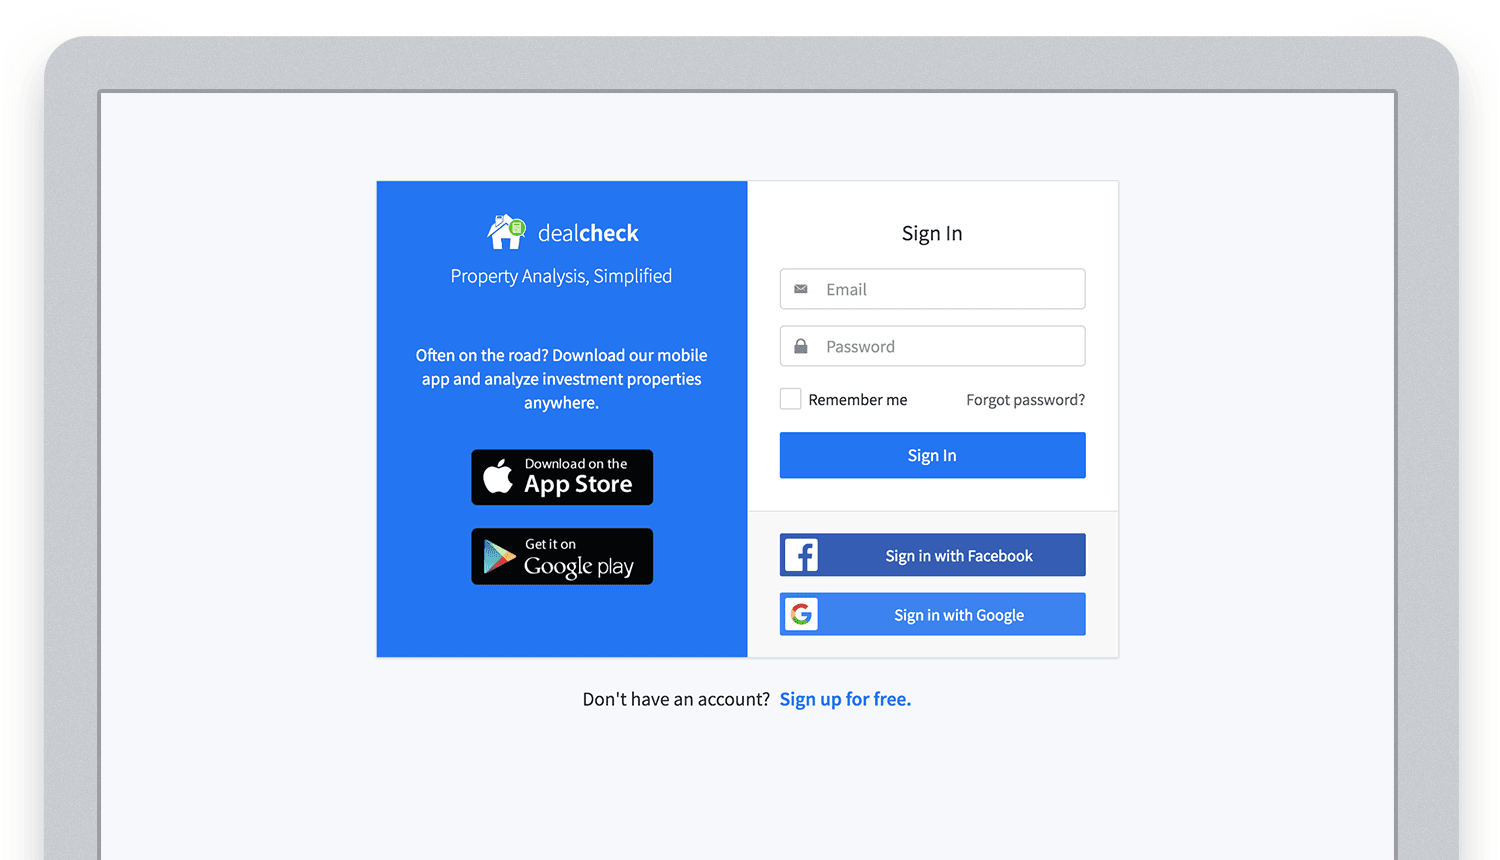 Email, Facebook and Google sign in powered by Firebase.